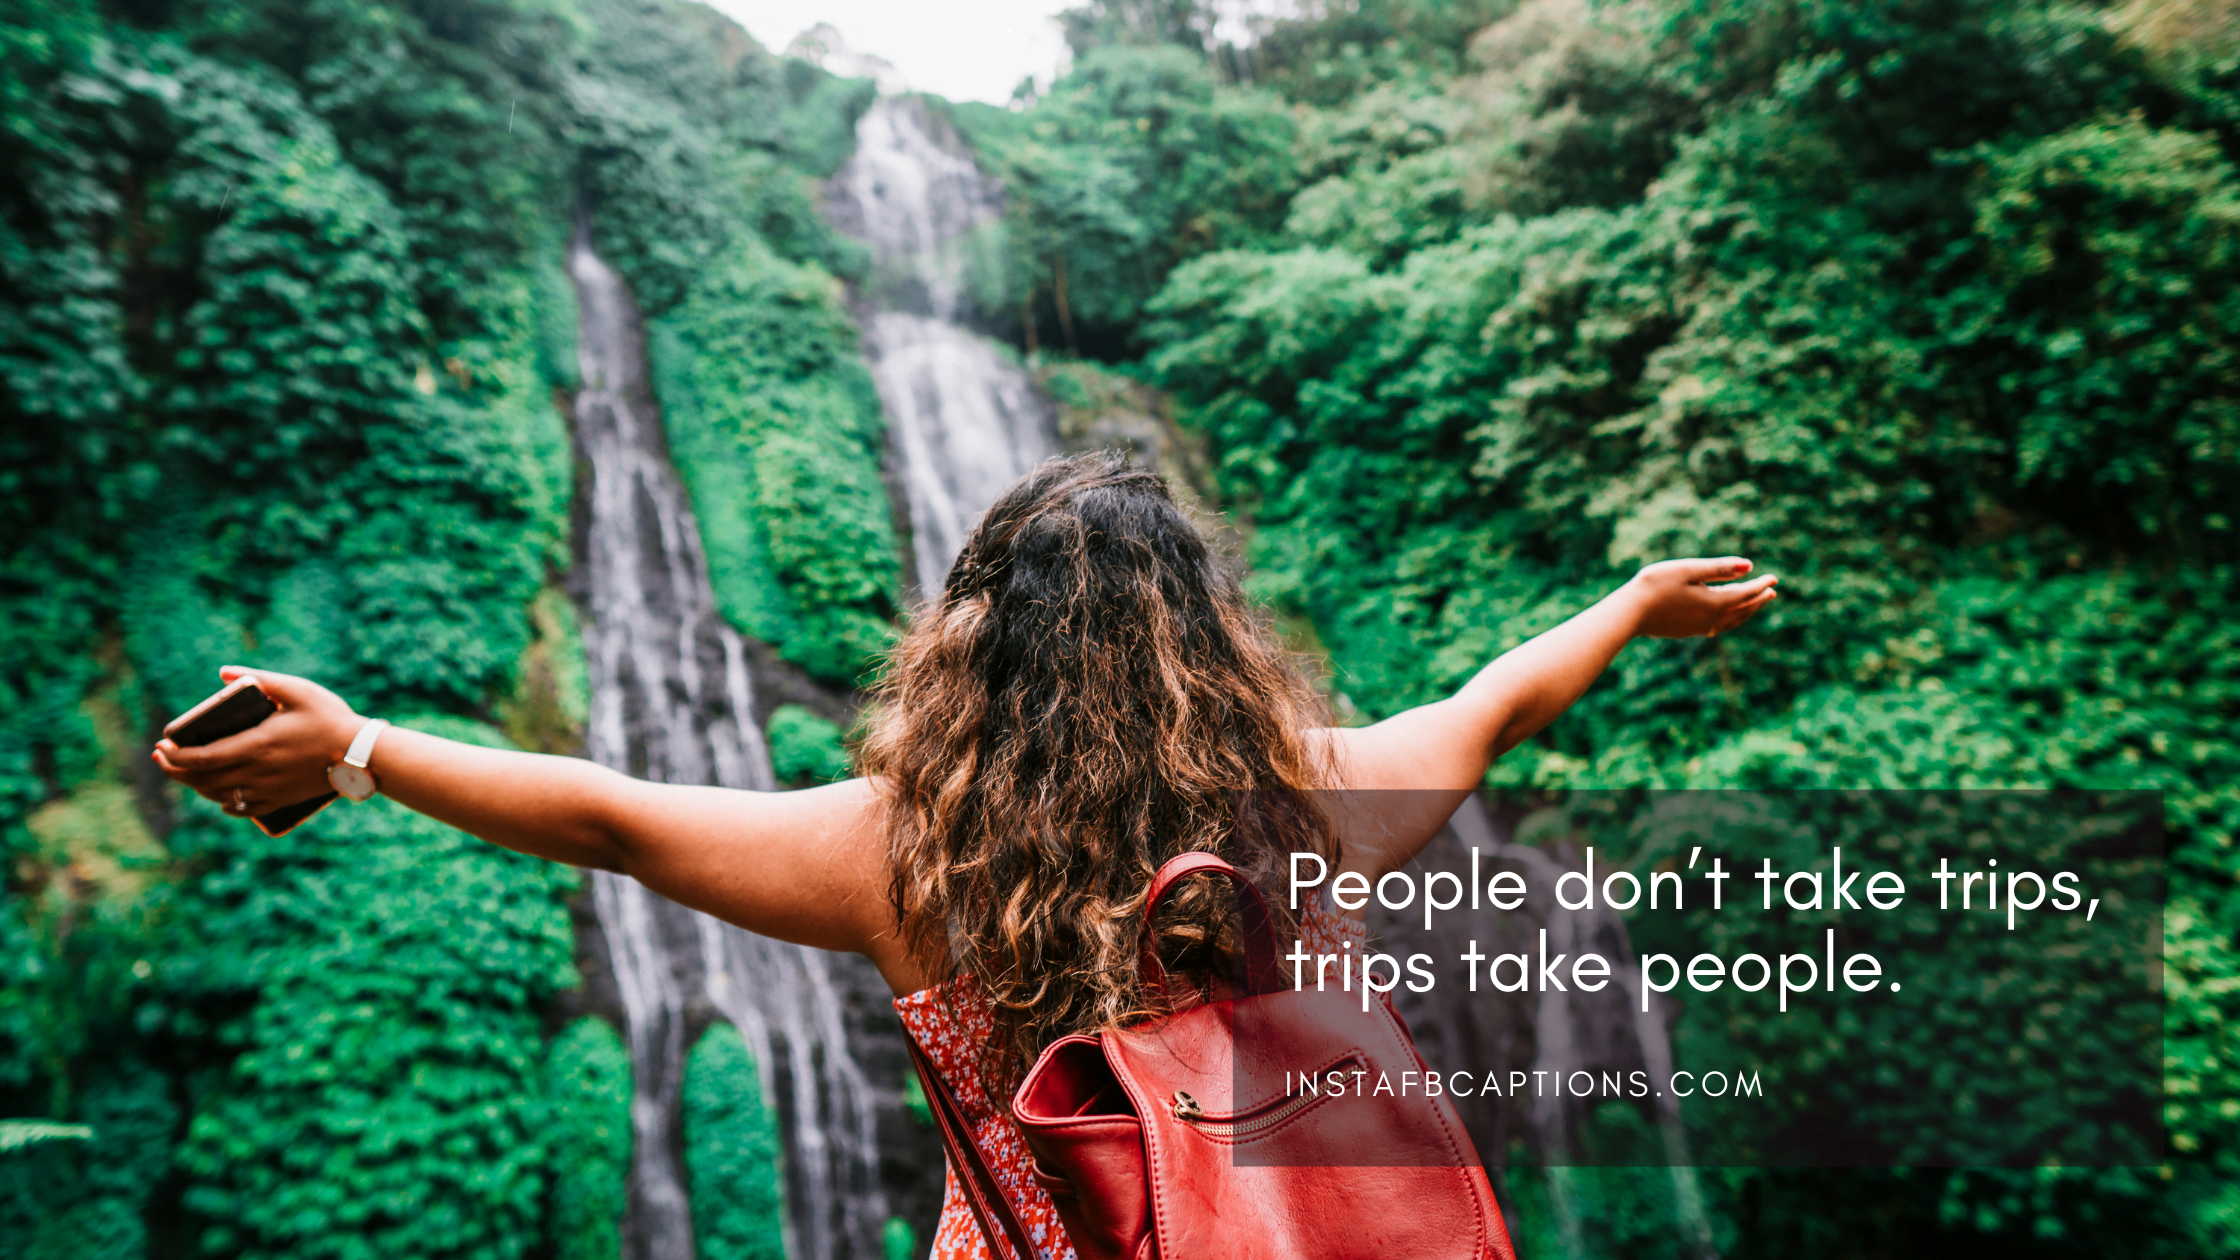 People don't take trips, trips take people travel captions for instagram - Short Travel Captions - 130+ Best Traveling Captions For Instagram